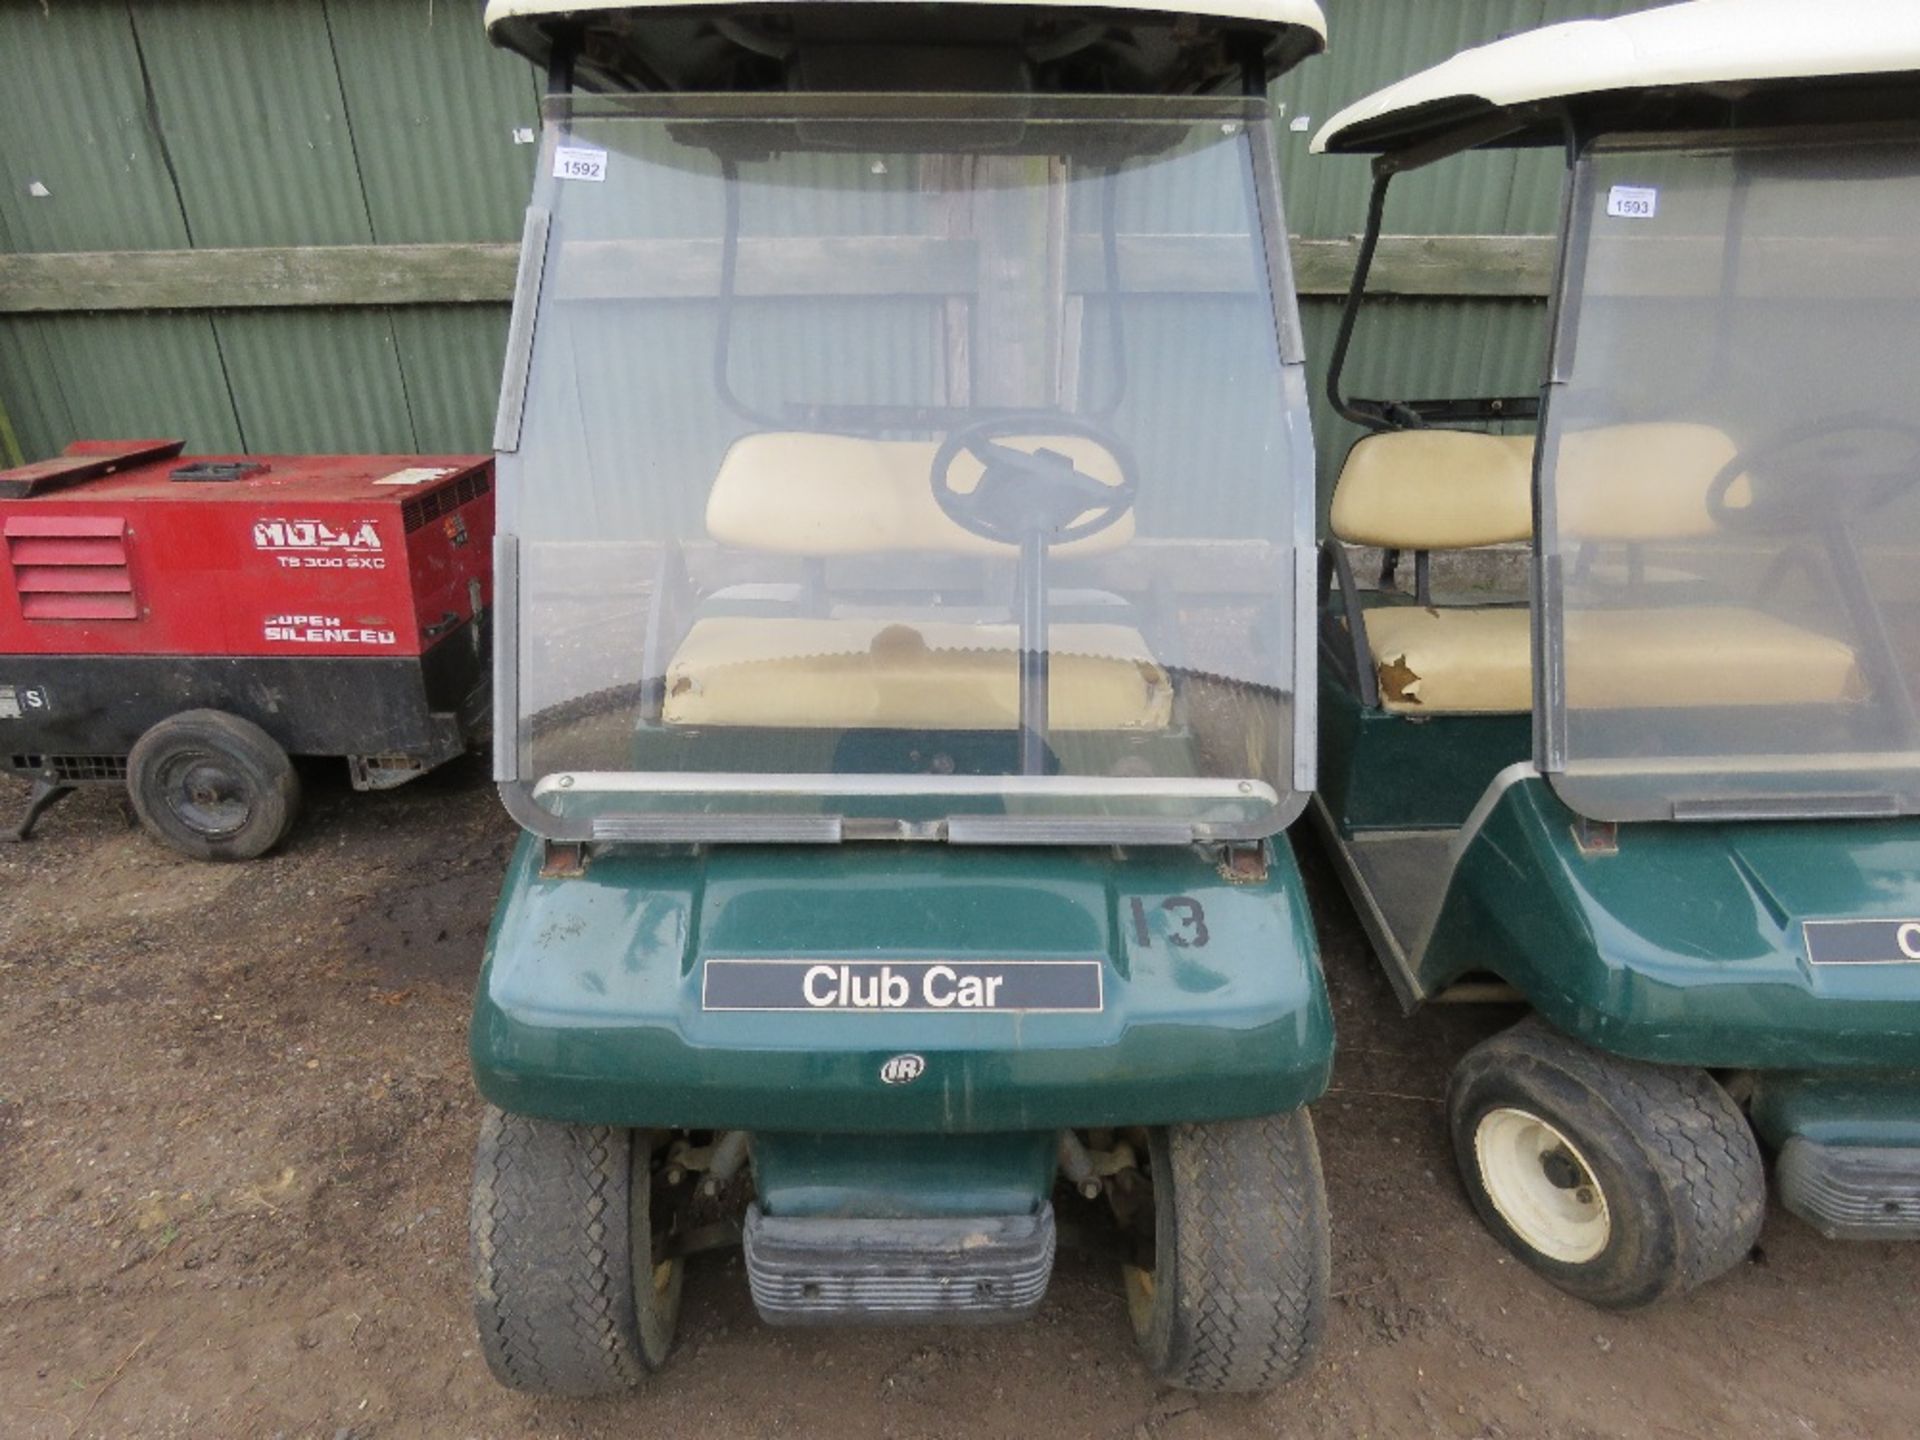 CLUBCAR PETROL ENGINED GOLF CART. BEEN STORED FOR SOME TIME, UNTESTED. - Image 3 of 9